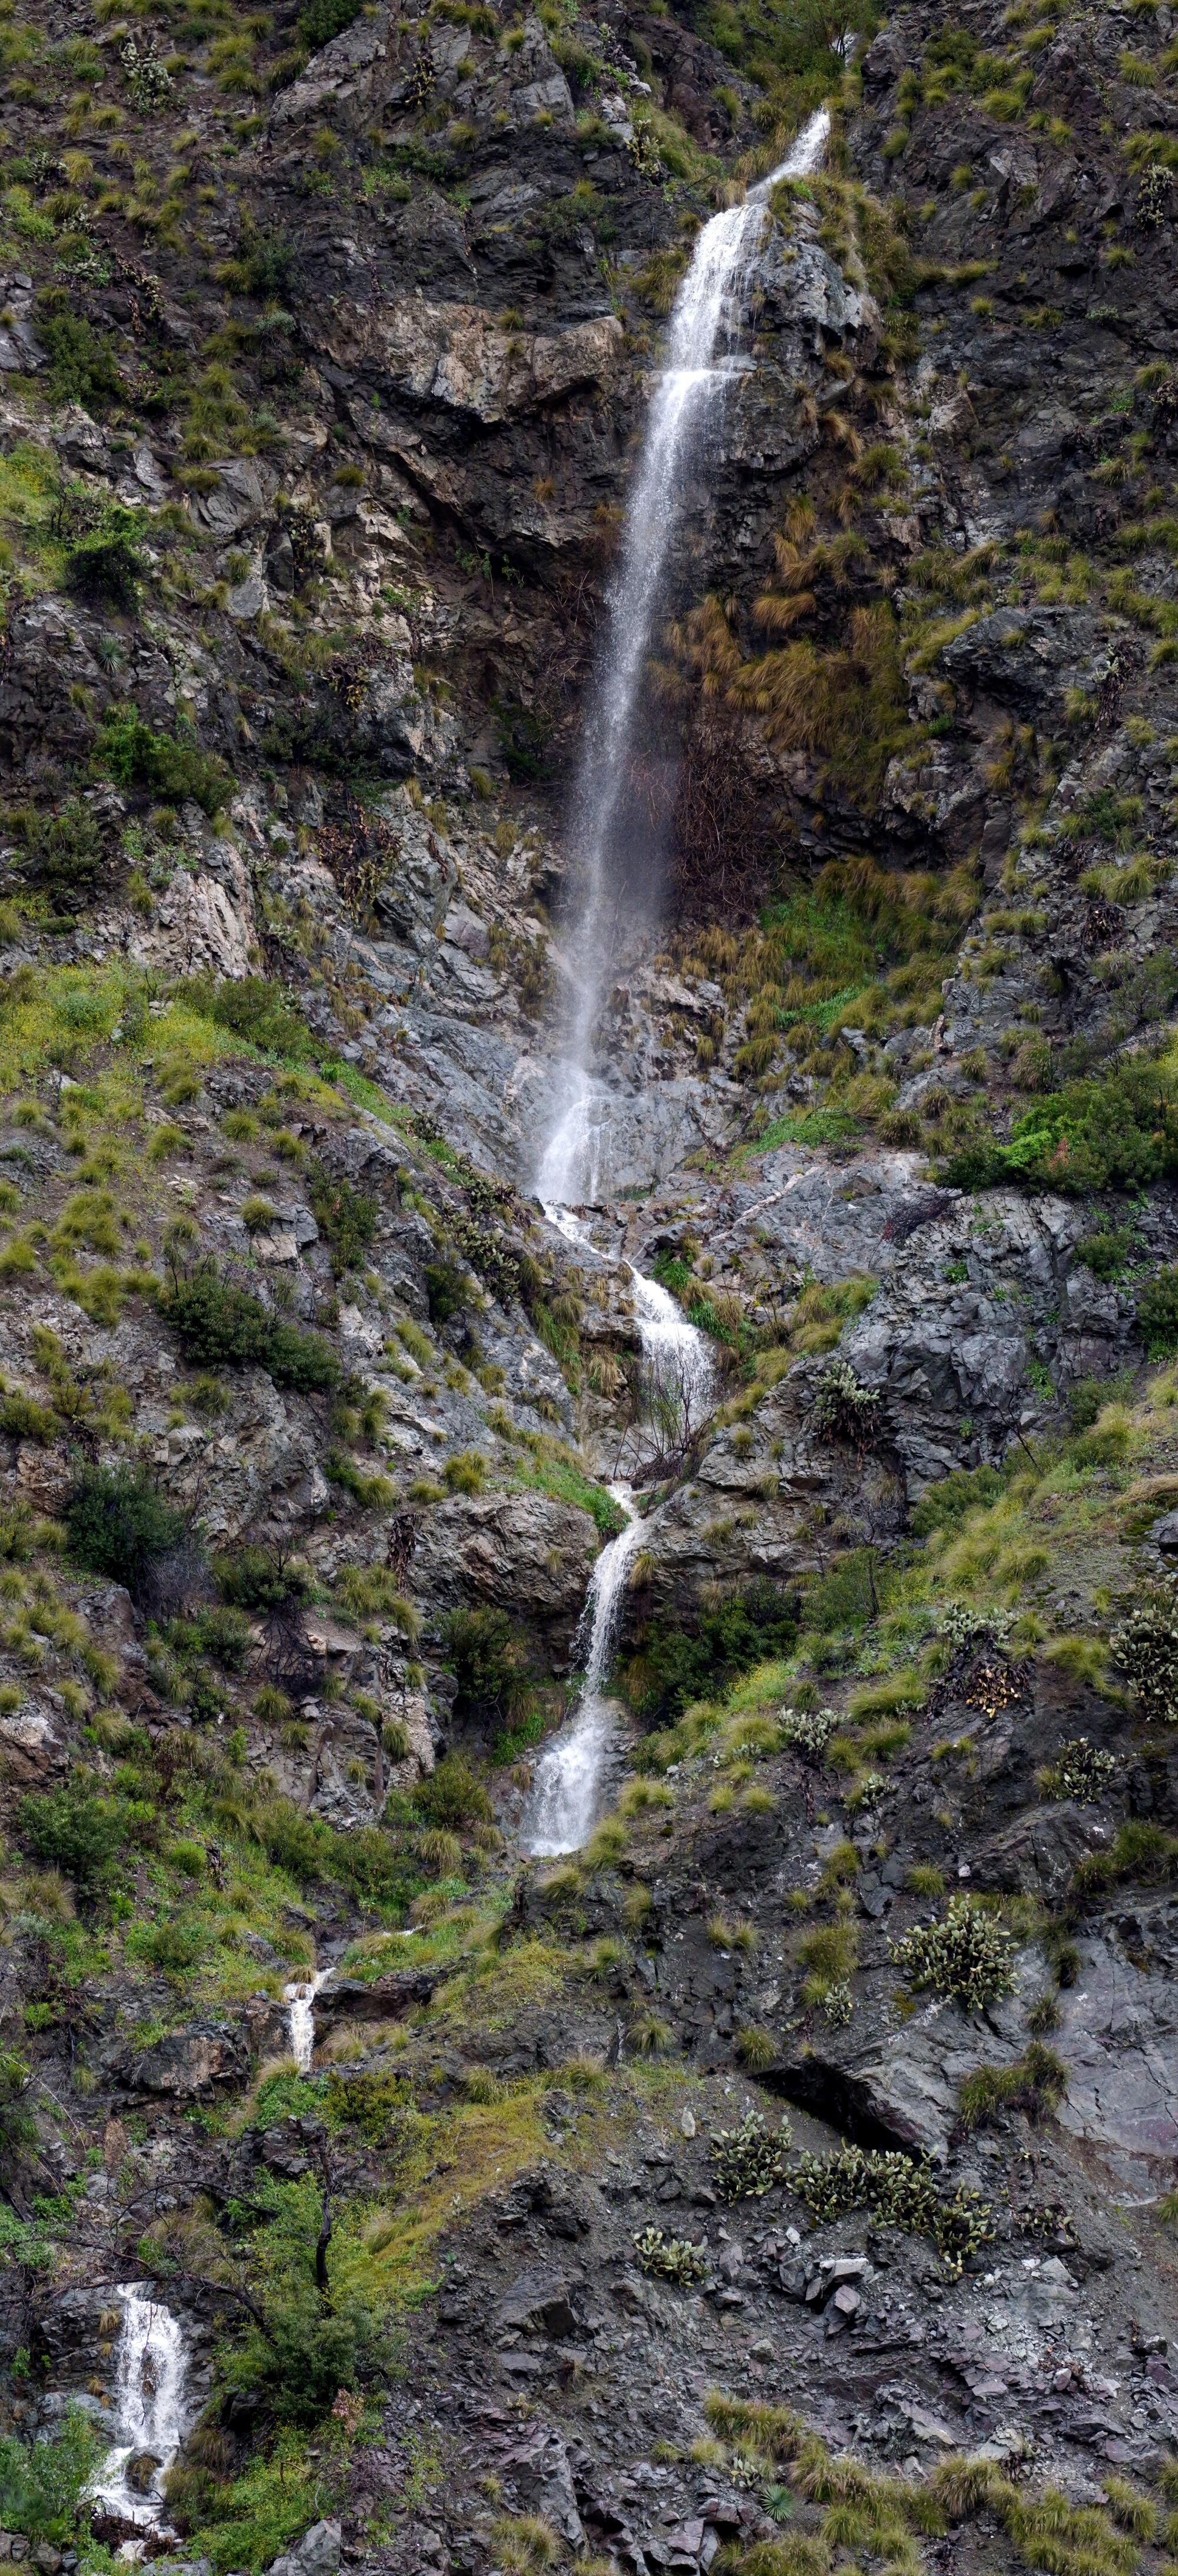 A two-photo composition shows a tall waterfall at the entrance of San Gabriel Canyon.